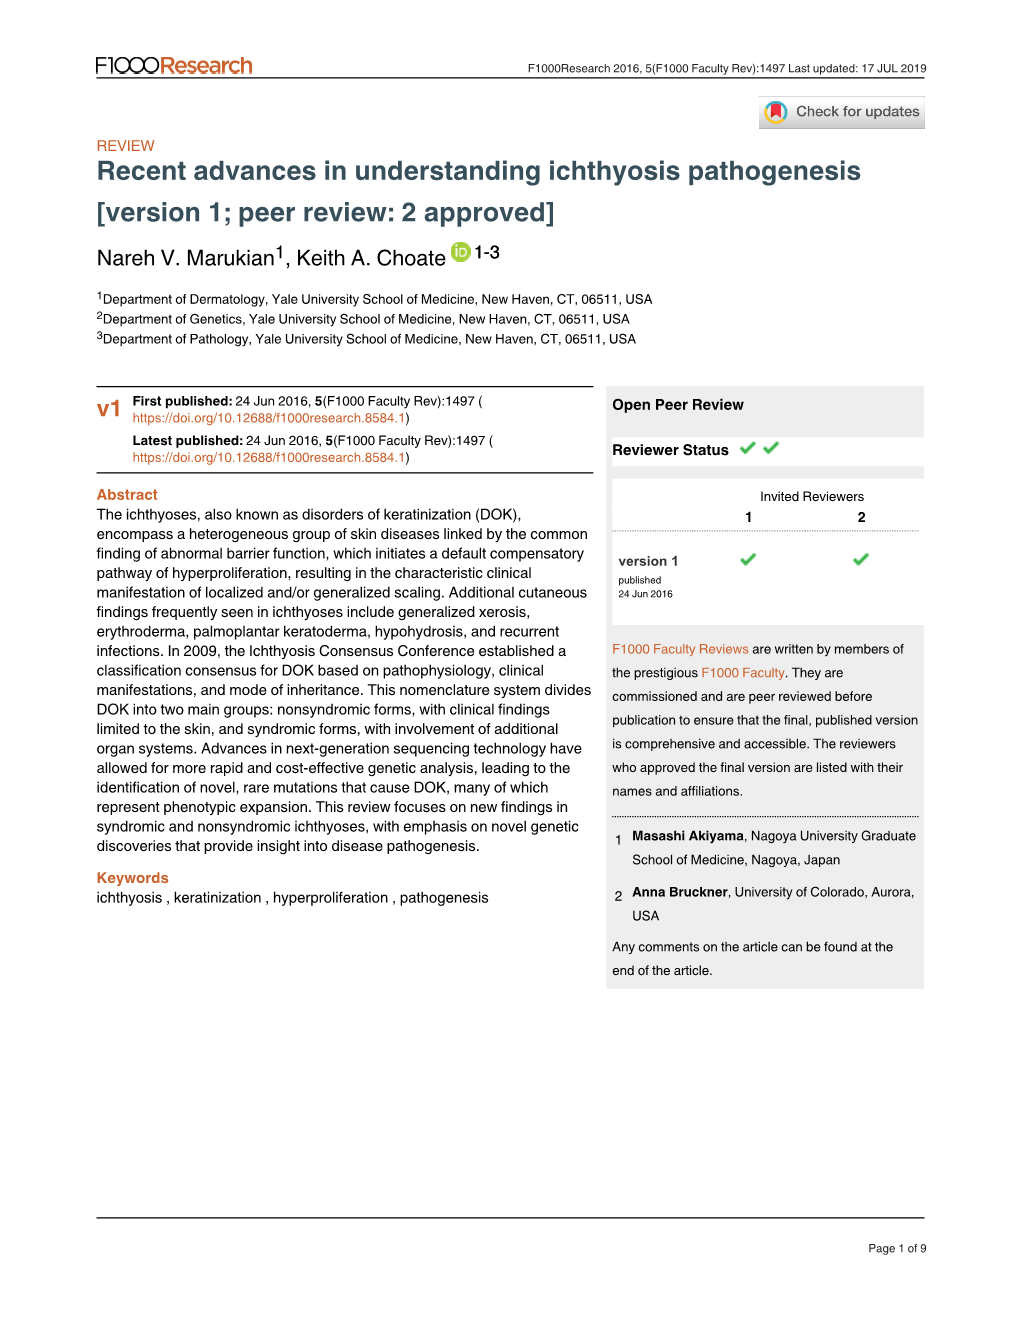 Recent Advances in Understanding Ichthyosis Pathogenesis [Version 1; Peer Review: 2 Approved] Nareh V